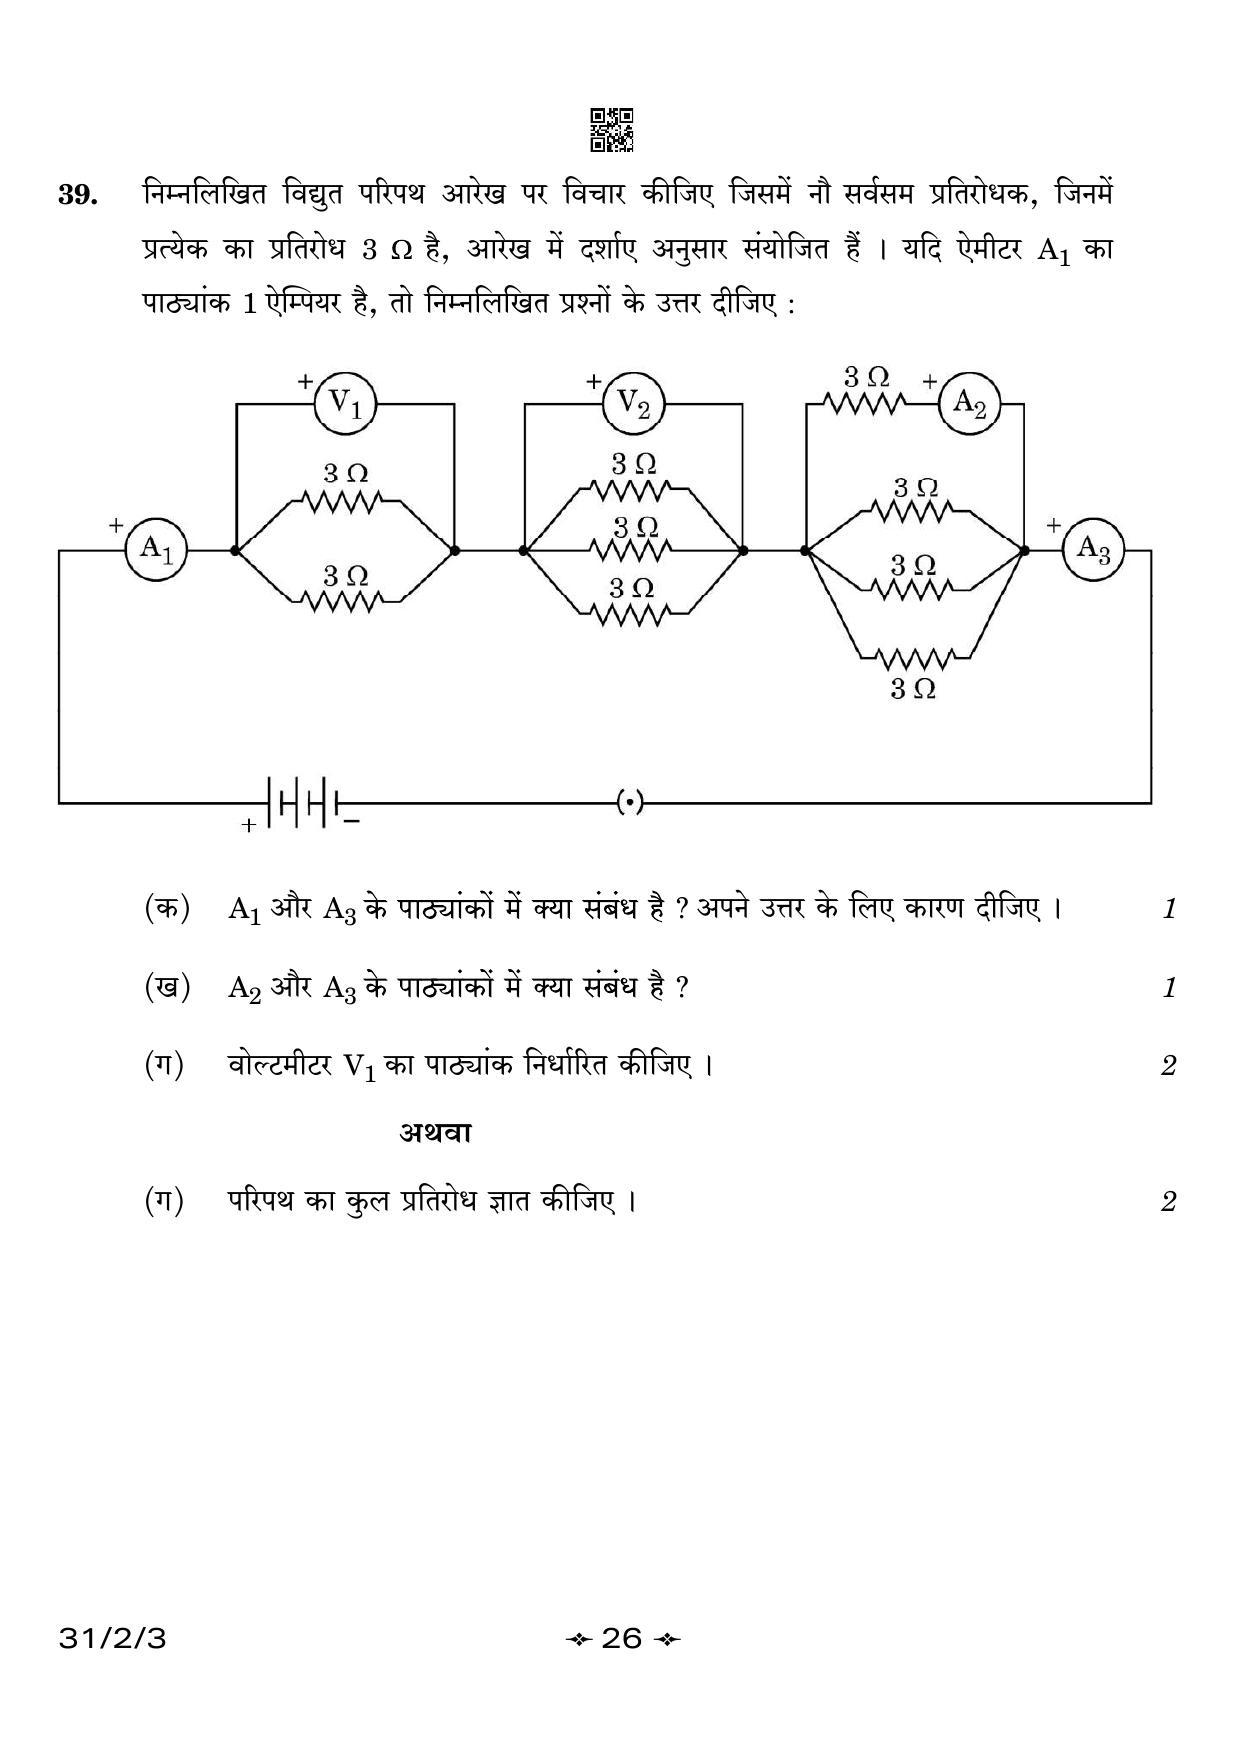 CBSE Class 10 31-2-3 Science 2023 Question Paper - Page 26